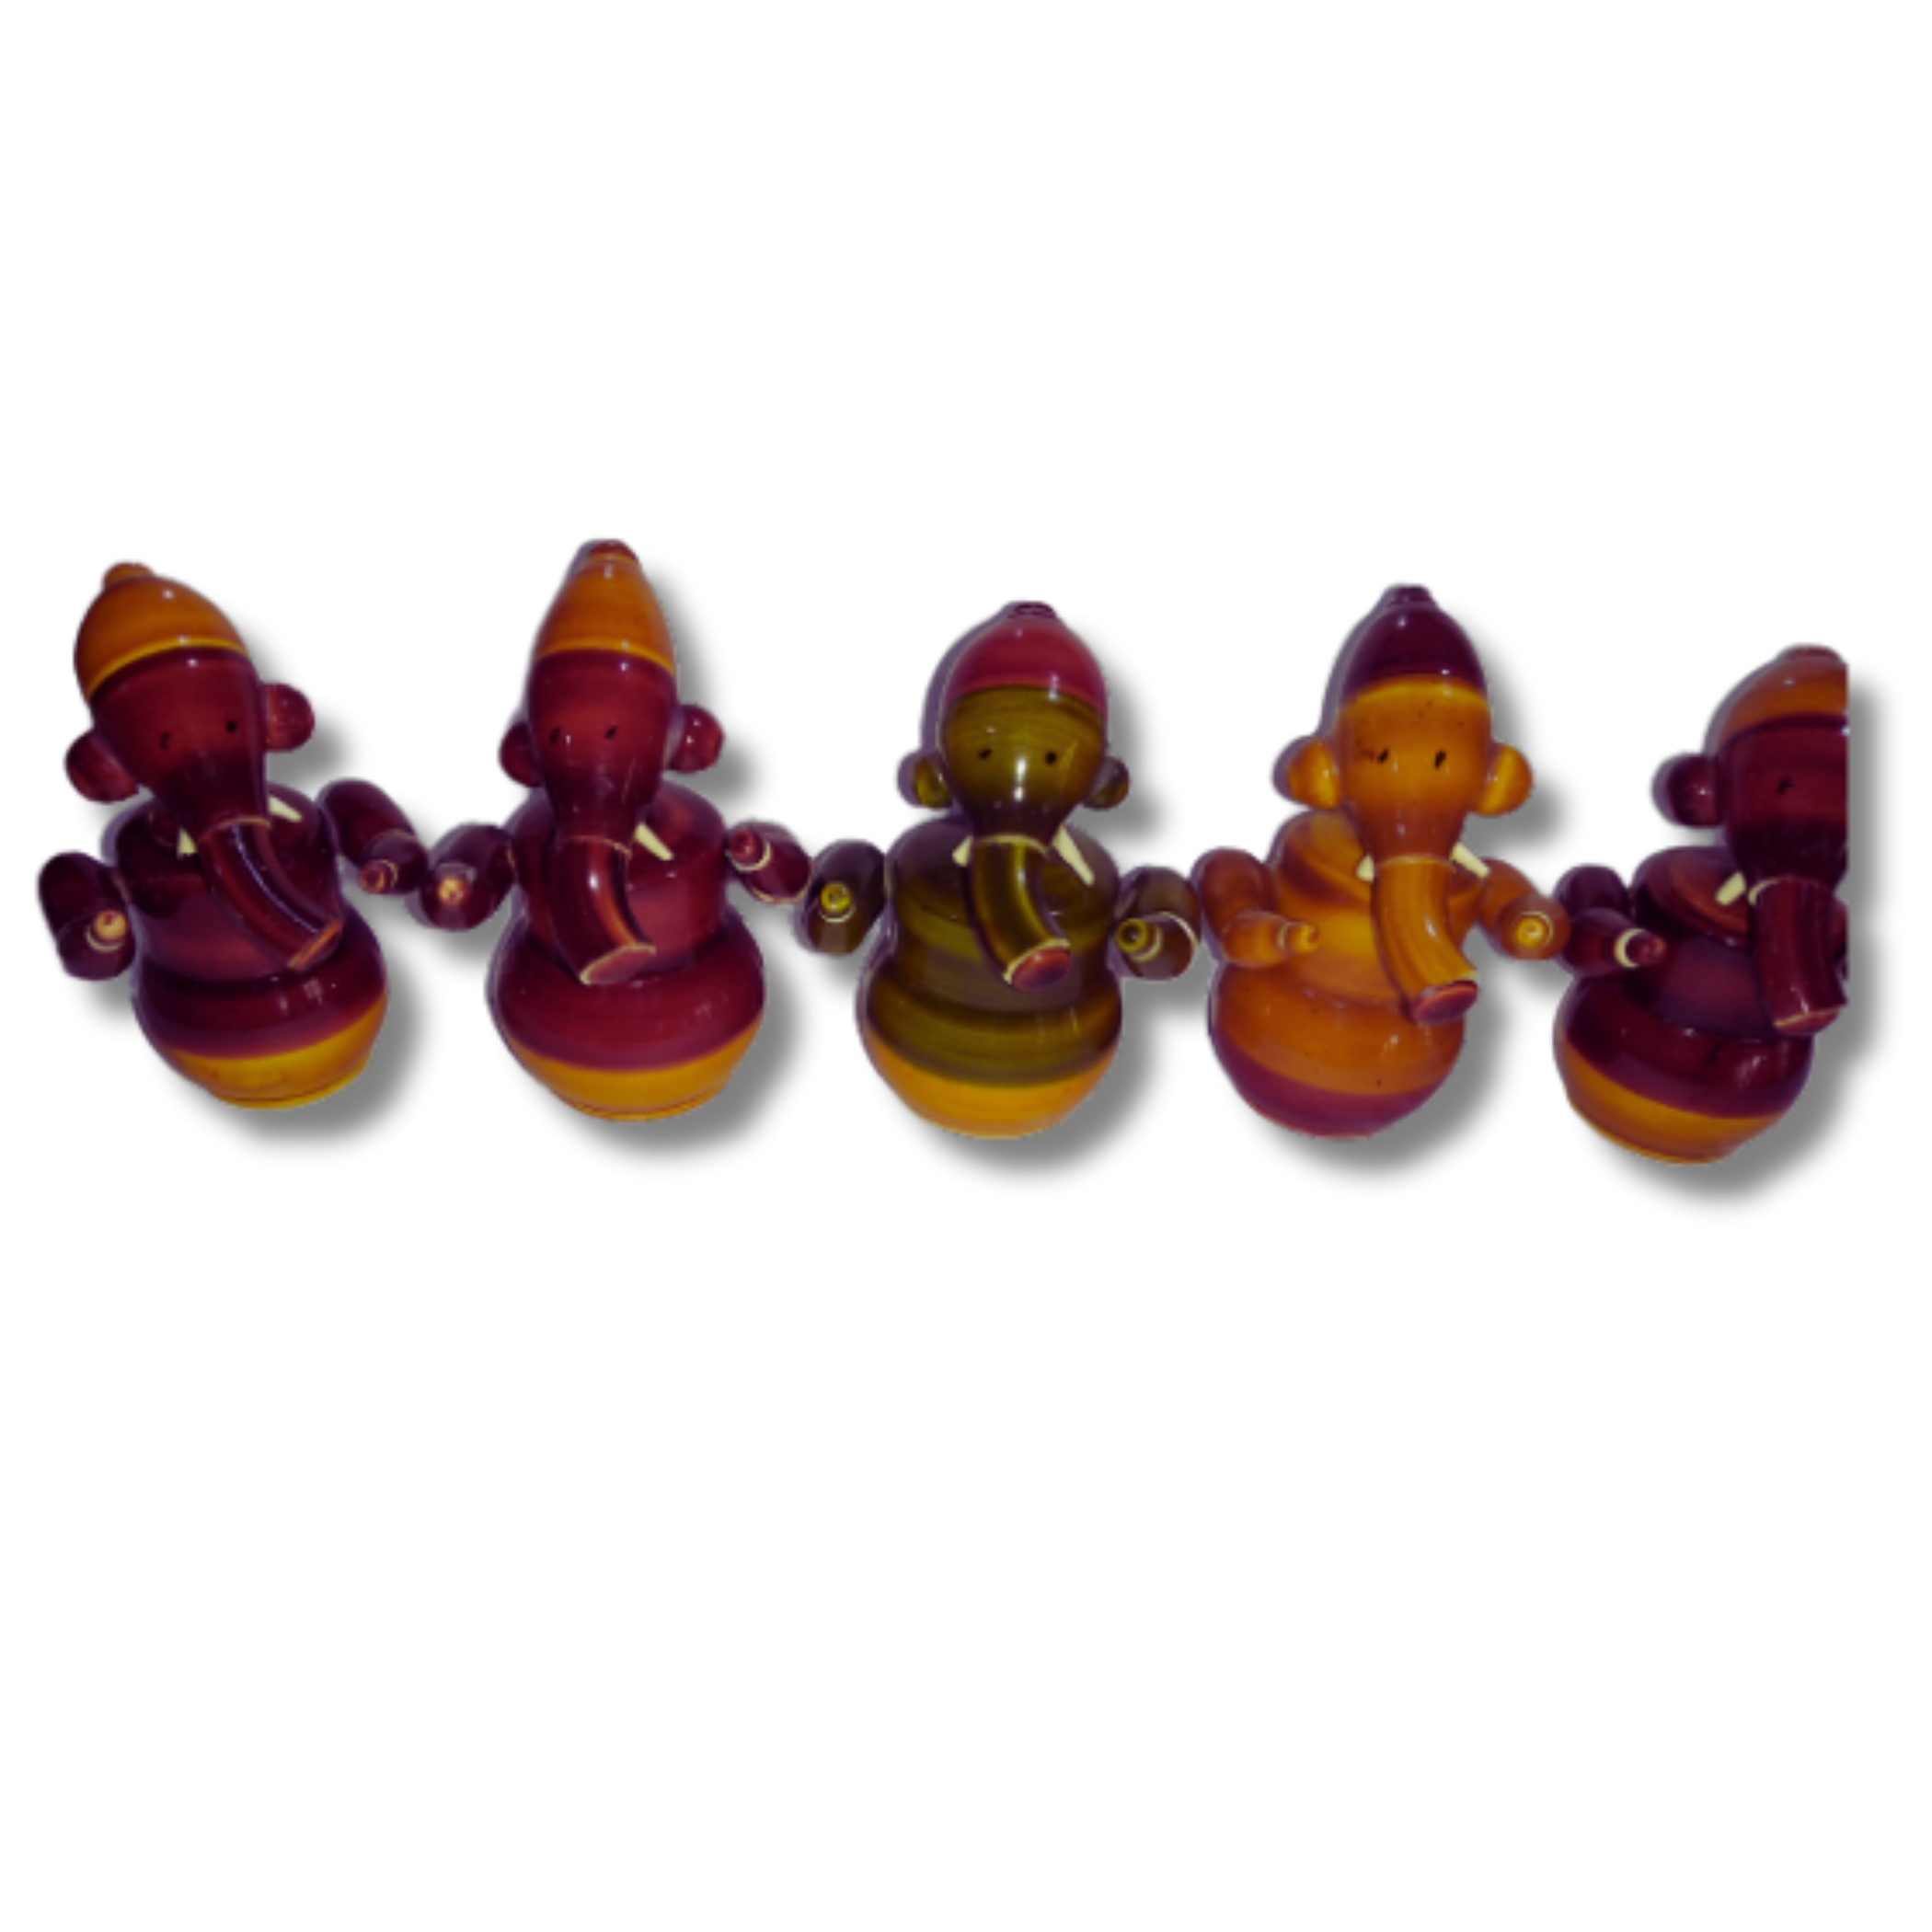 Authentic Etikoppaka Toys: Handcrafted Wooden Masterpieces for Play and Decor -Small Ganesha- Set of 5